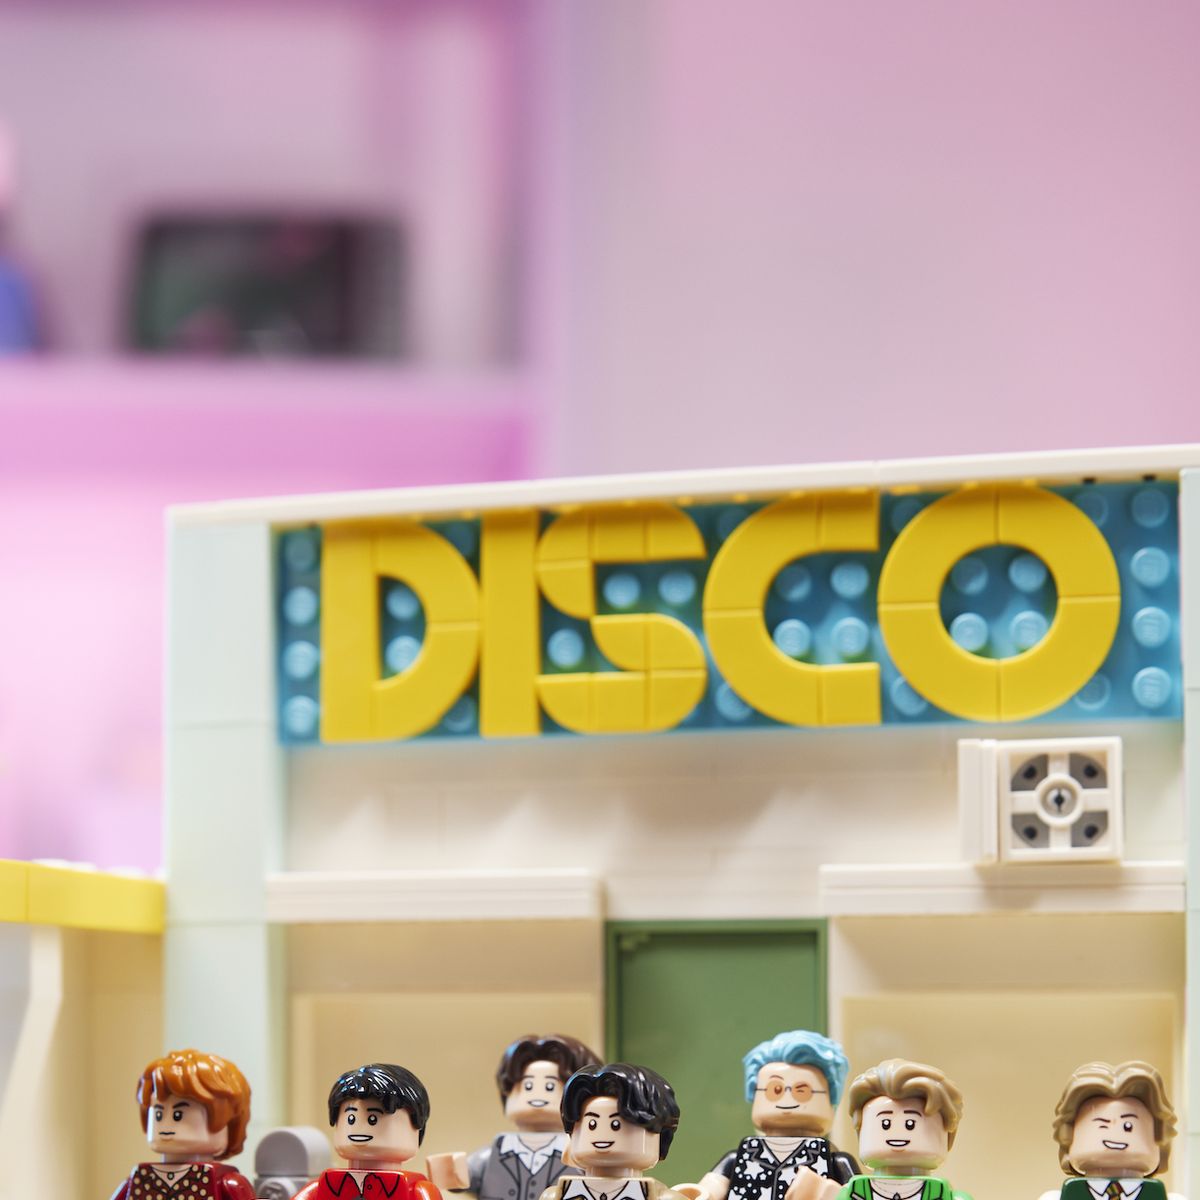 LEGO's BTS set brand-new minifigures of the band is on at last